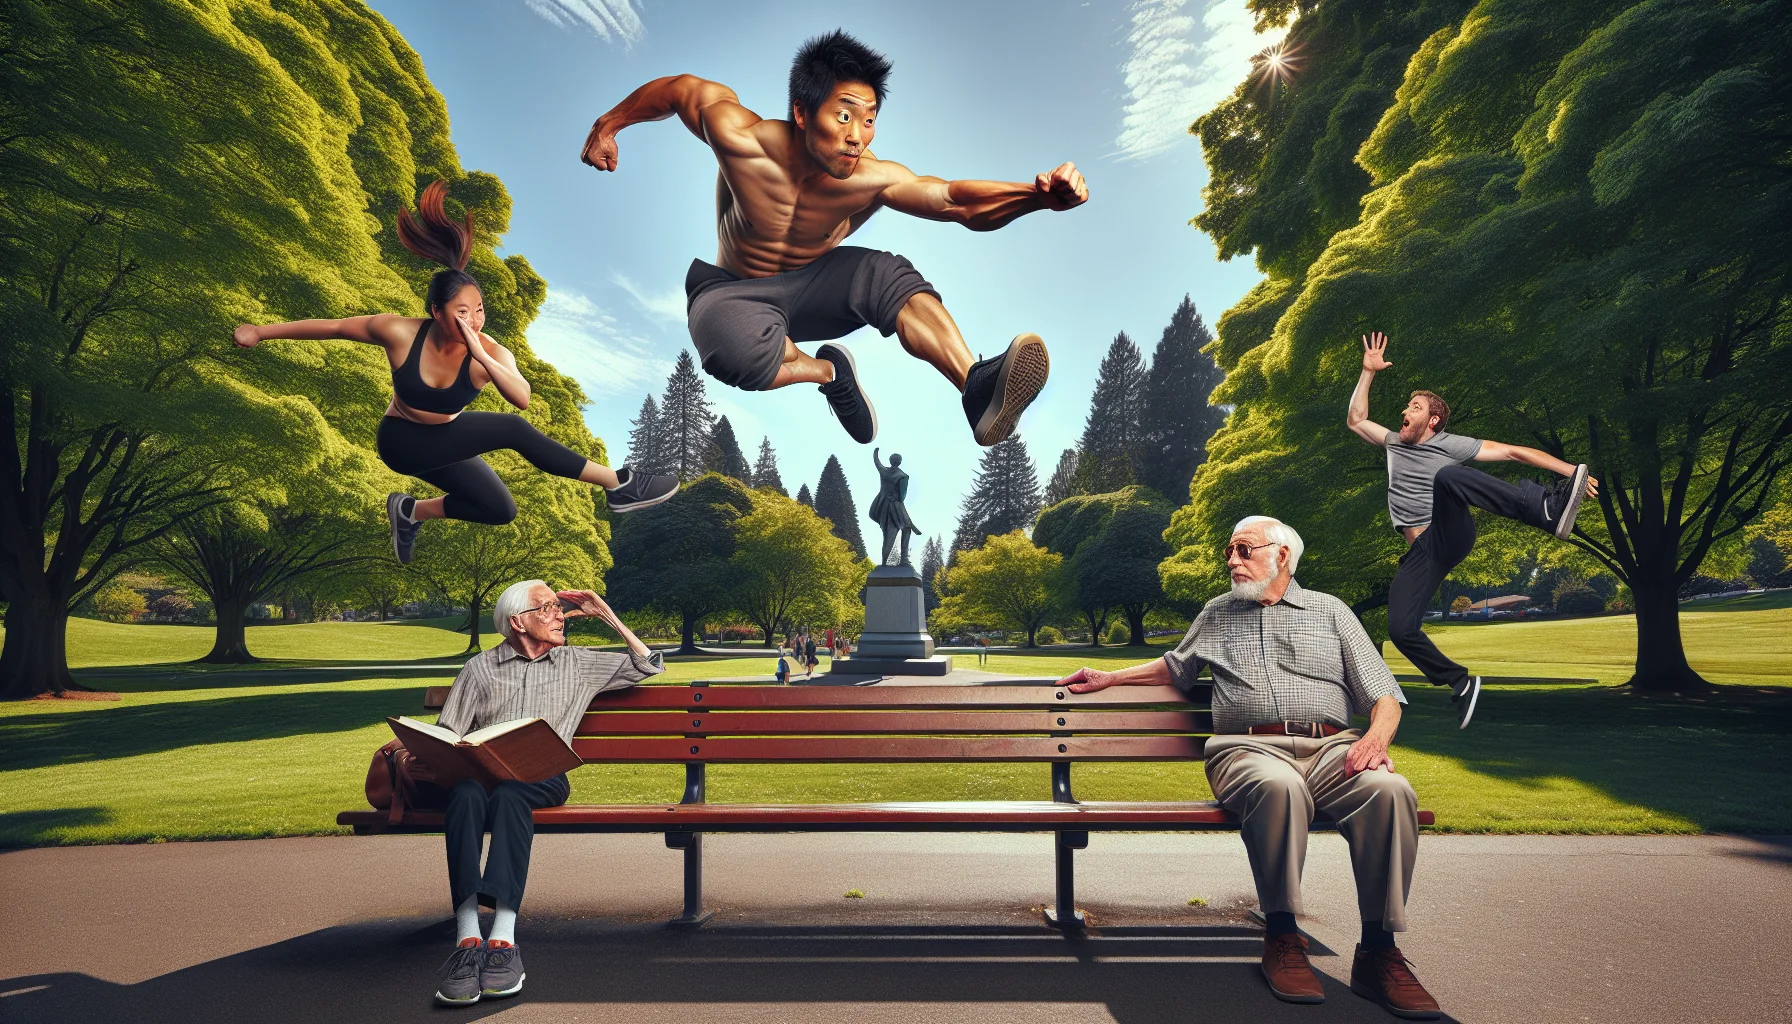 Create a humorous and enthralling scene at Tualatin park, focused on a parkour activity. Visualize an Asian male, exhibiting high level agility, leaping over a park bench with a look of excitement on his face. Behind him, a Black female follows suit, mirroring his actions. A Caucasian elderly man, watching them with amusement, attempts to mimic their actions by jumping over a much shorter object, a book. The backdrop is filled with verdant trees, a sunny day with a clear blue sky, expressing an energetic, warm, and inviting atmosphere. The image should aim to inspire people to enjoy exercising and try something new like parkour.